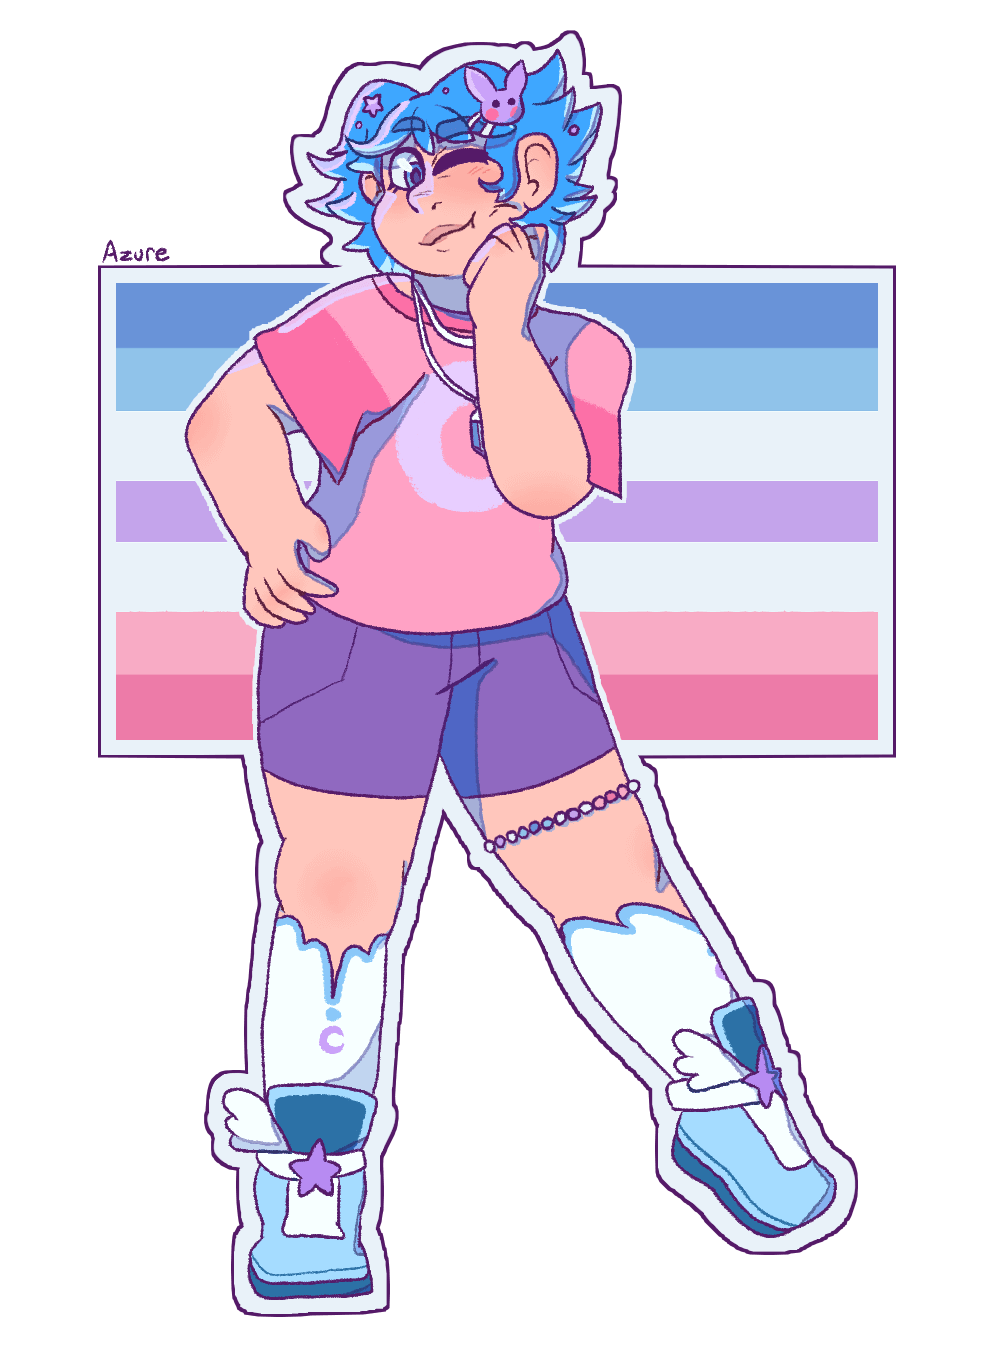 Art of a person with blue hair, star and bunny-themed hair accessories, a crystal necklace, a moon shirt, shorts, a bigender pride bracelet around her thigh, high socks with a blue trim and a moon in front of it, and shoes with a star in the front, and wings on the sides. It is done in bigender pride flag colors, with the exception of the skin tone. He is posing with one leg out, and one hand to his face, squishing her cheek slightly as she winks. There is a bigender pride flag in the background.